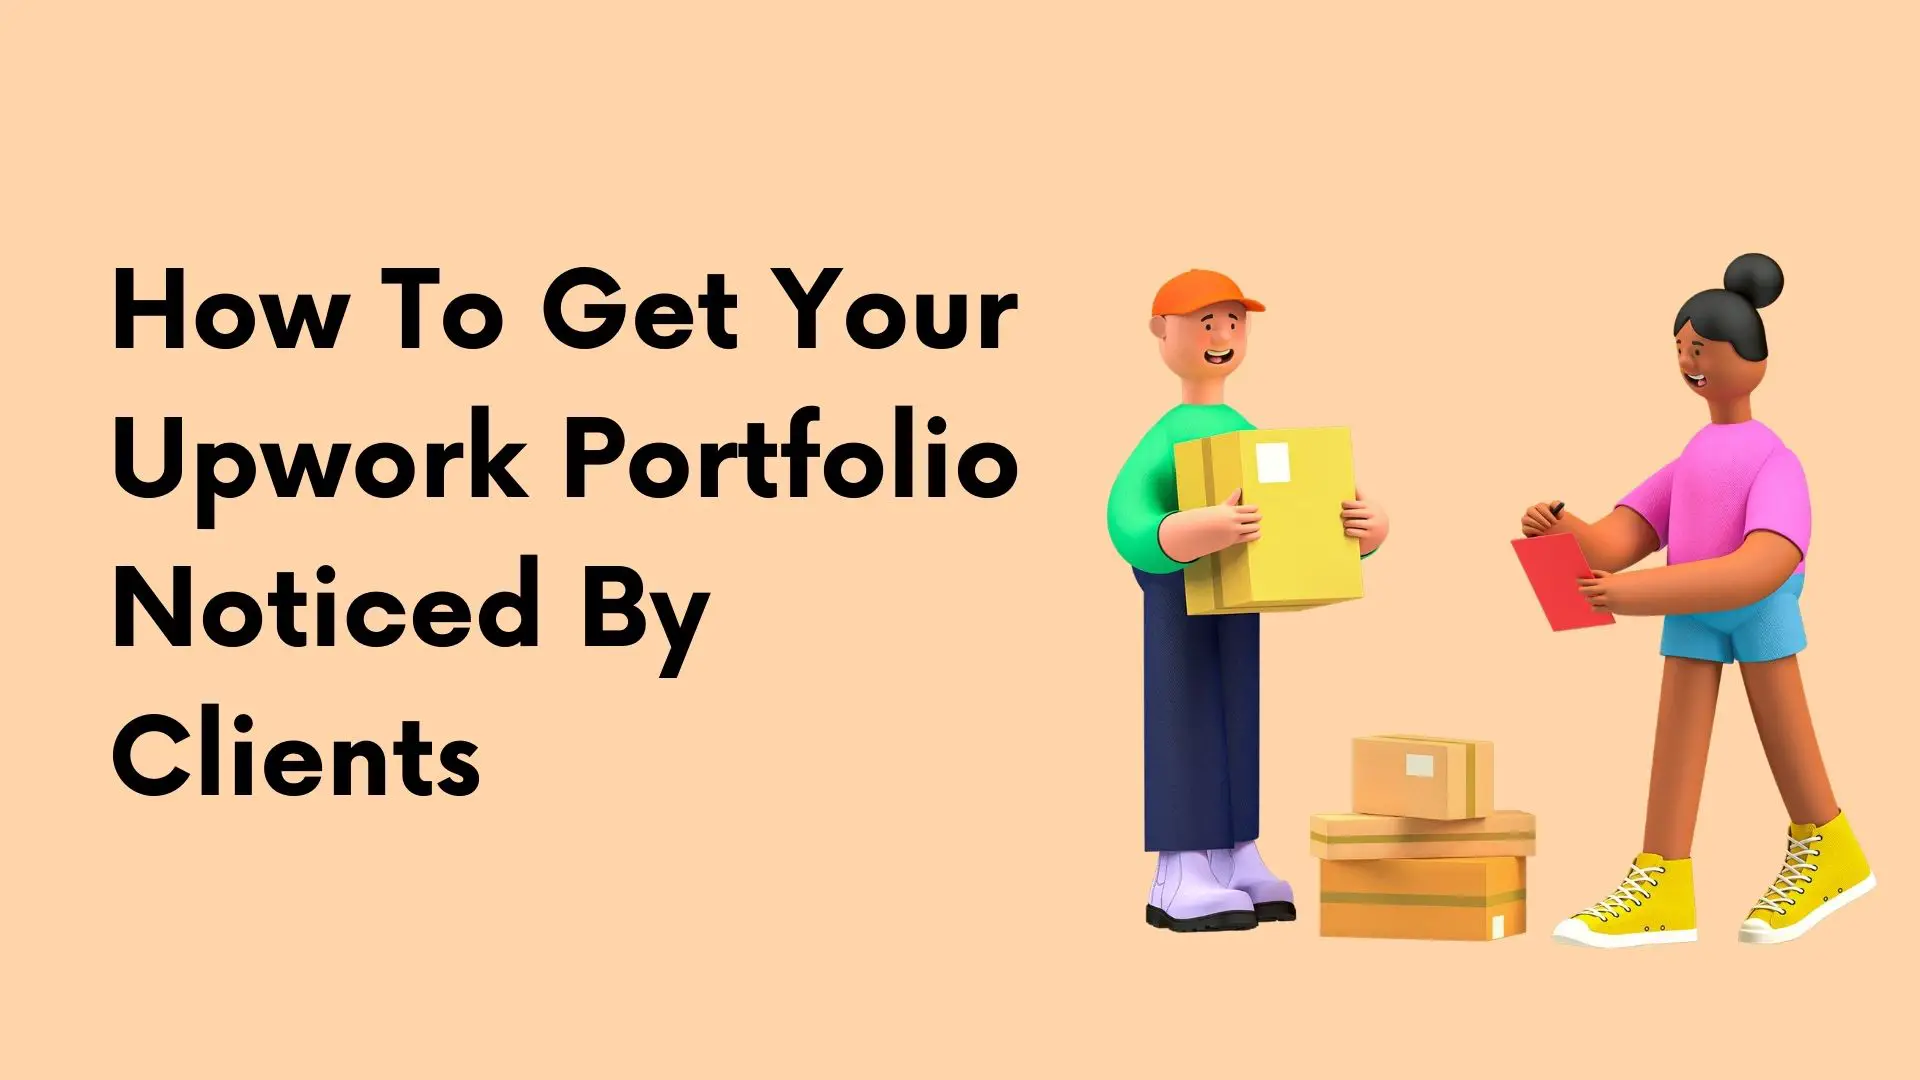 How To Get Your Upwork Portfolio Noticed By Clients